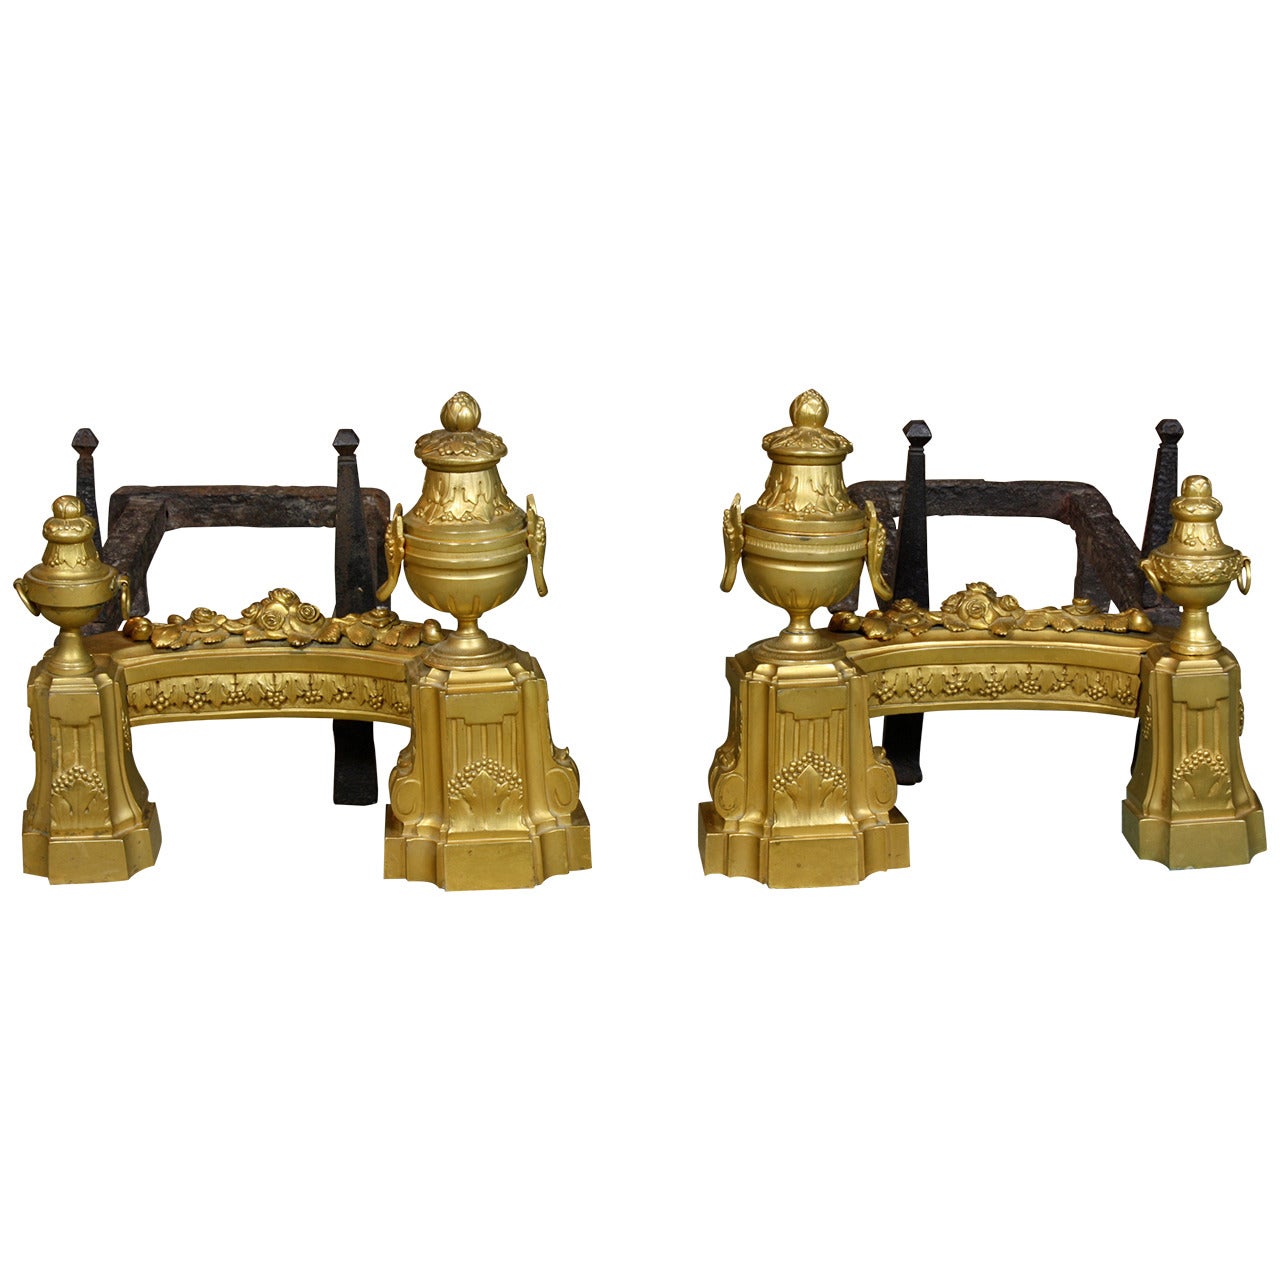 Pair of French Gilt-Bronze Neoclassical Andirons